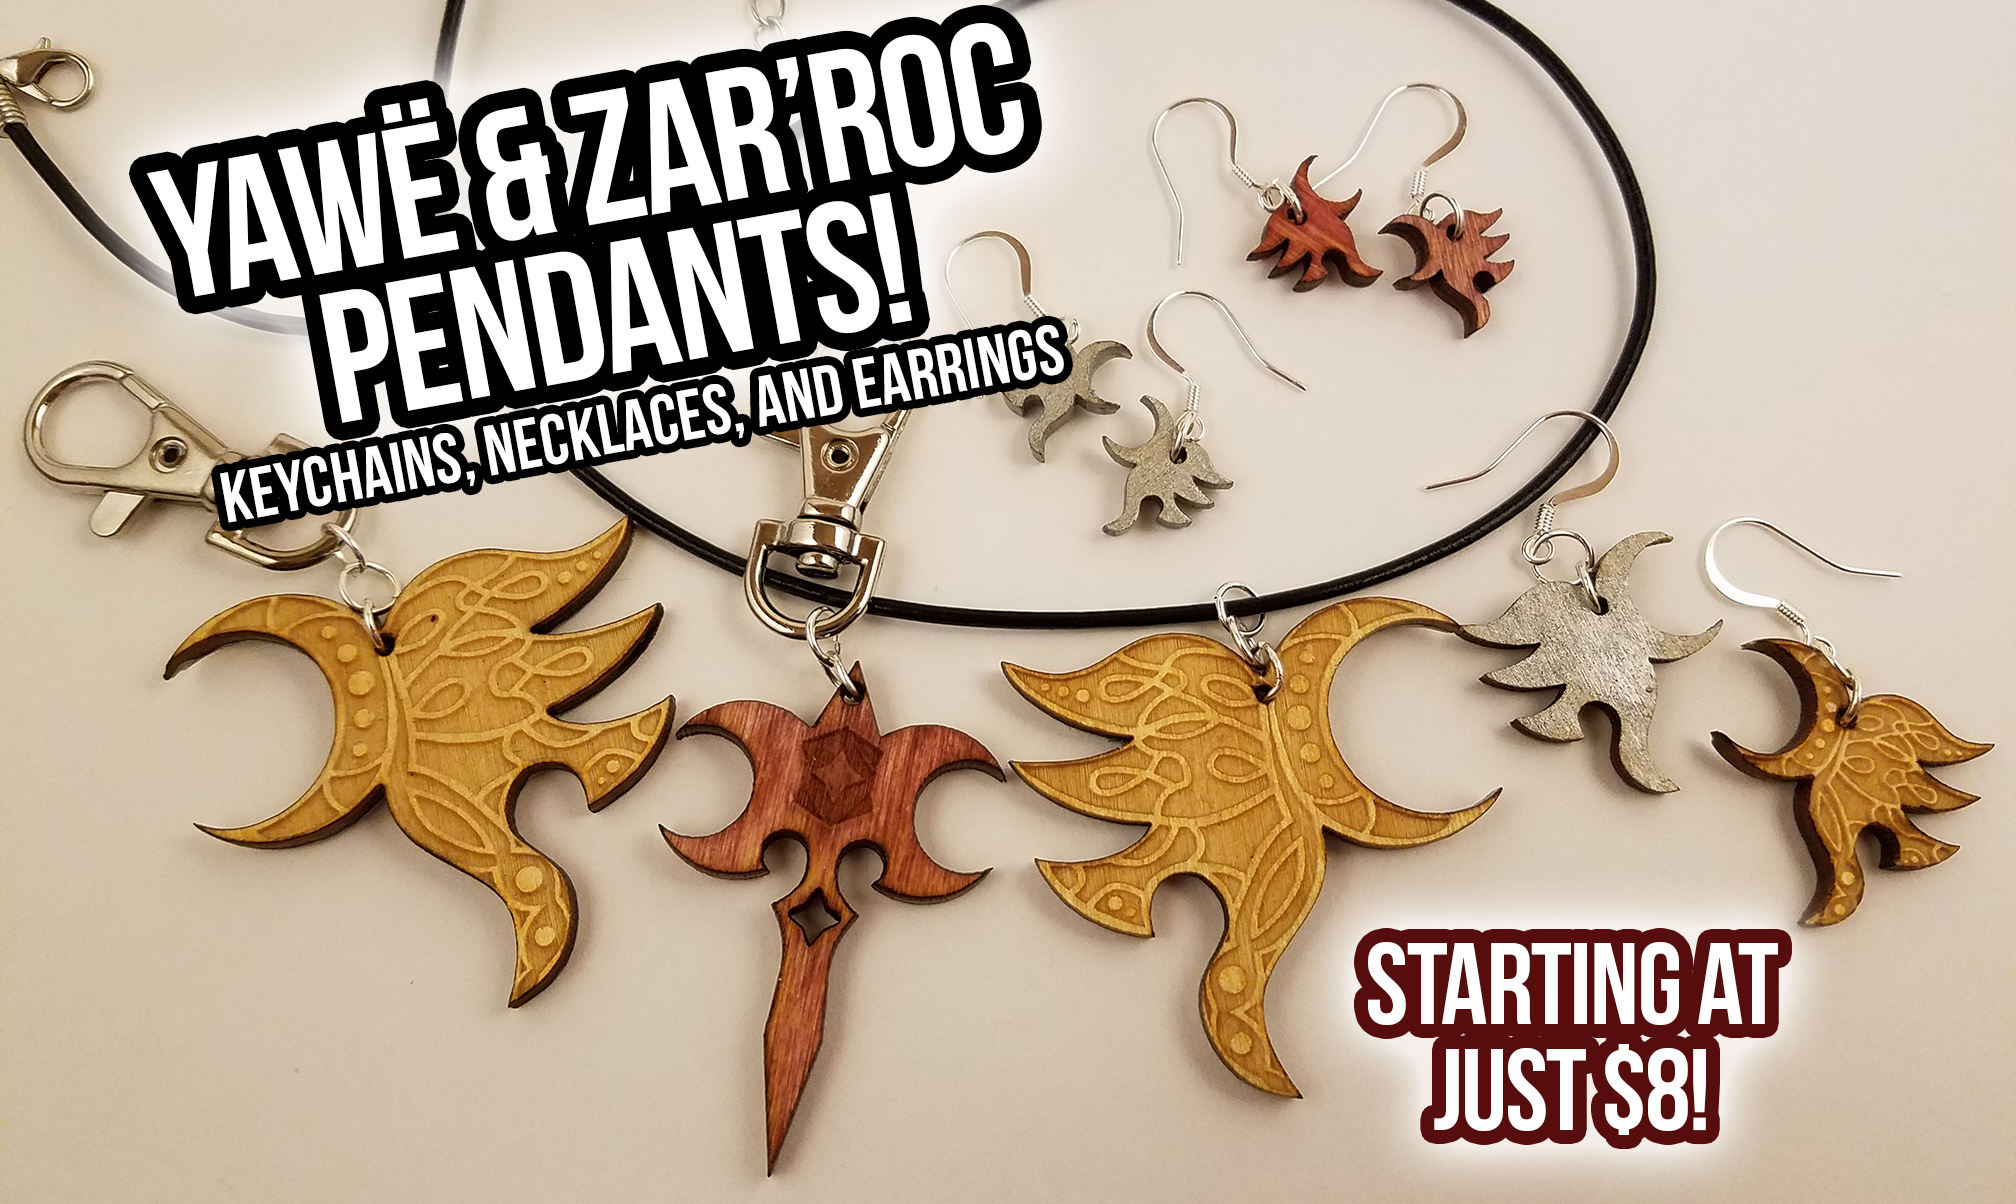 Yawë and Zar’roc keychains, necklaces, and earrings on sale now for just $8!